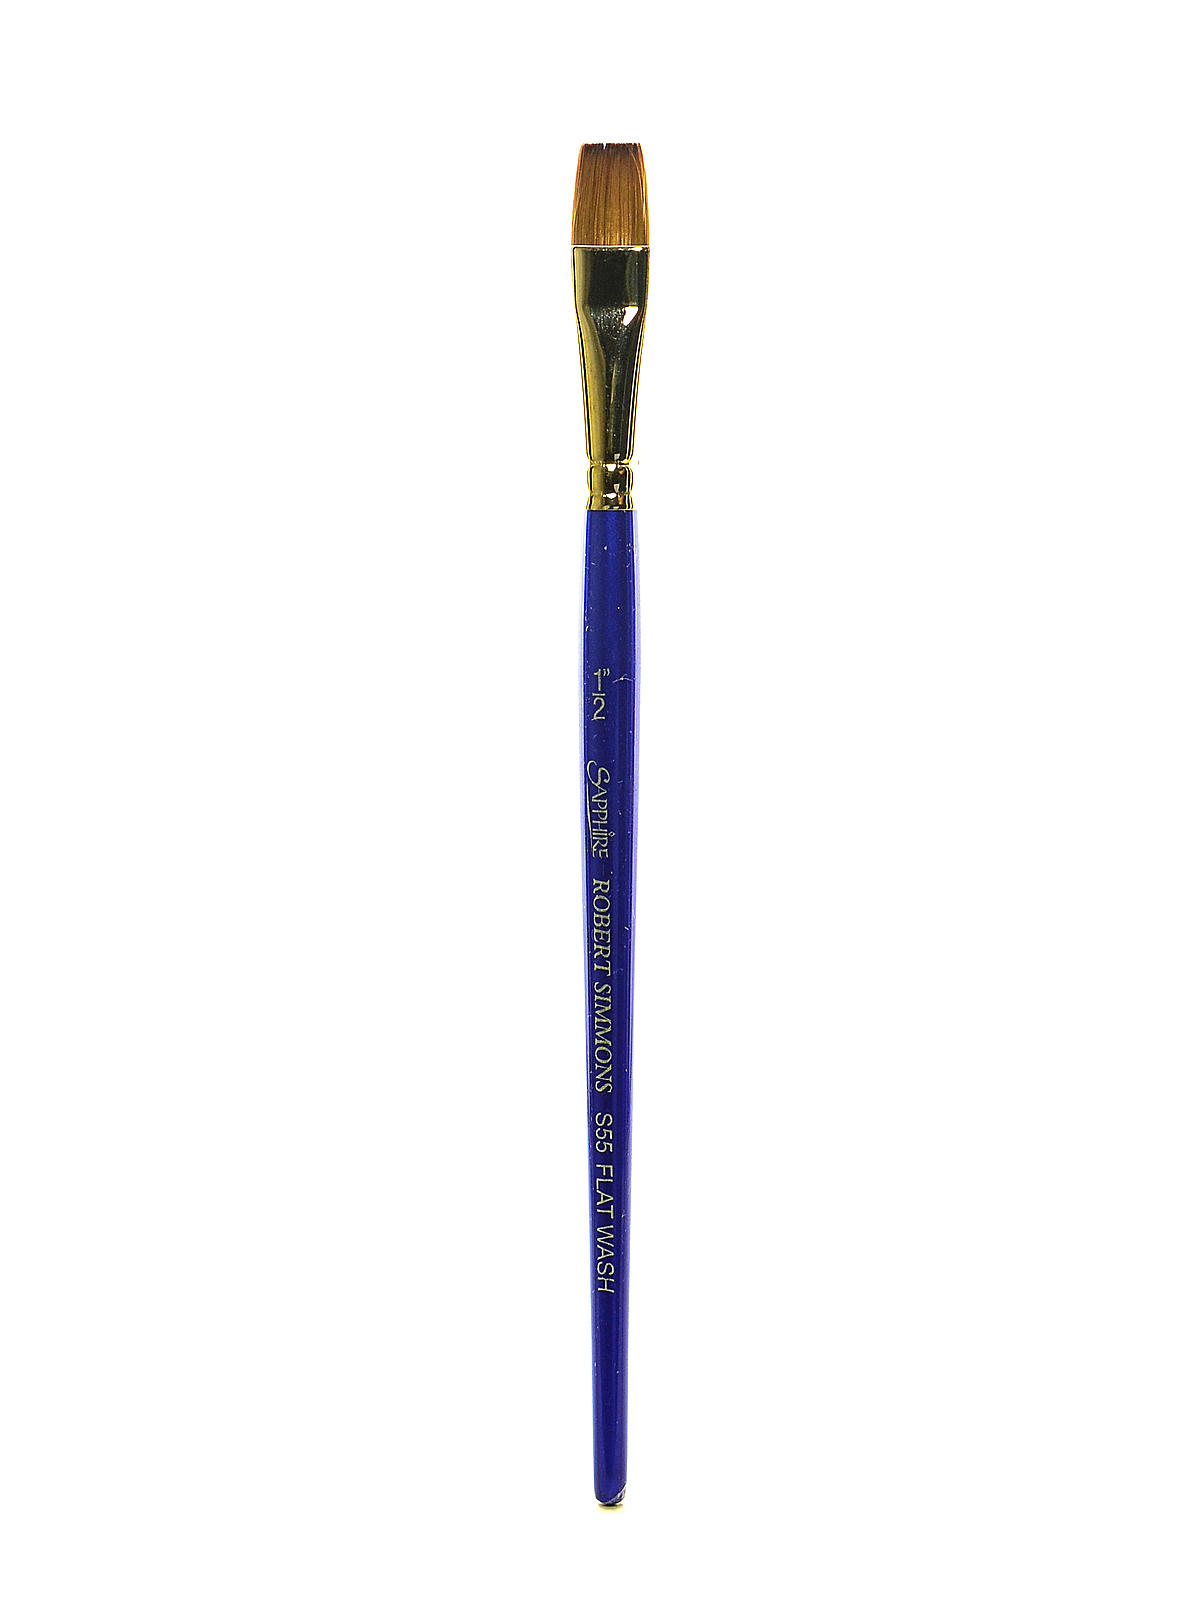 Sapphire Series Synthetic Brushes Short Handle 1 2 In. Flat Wash S55